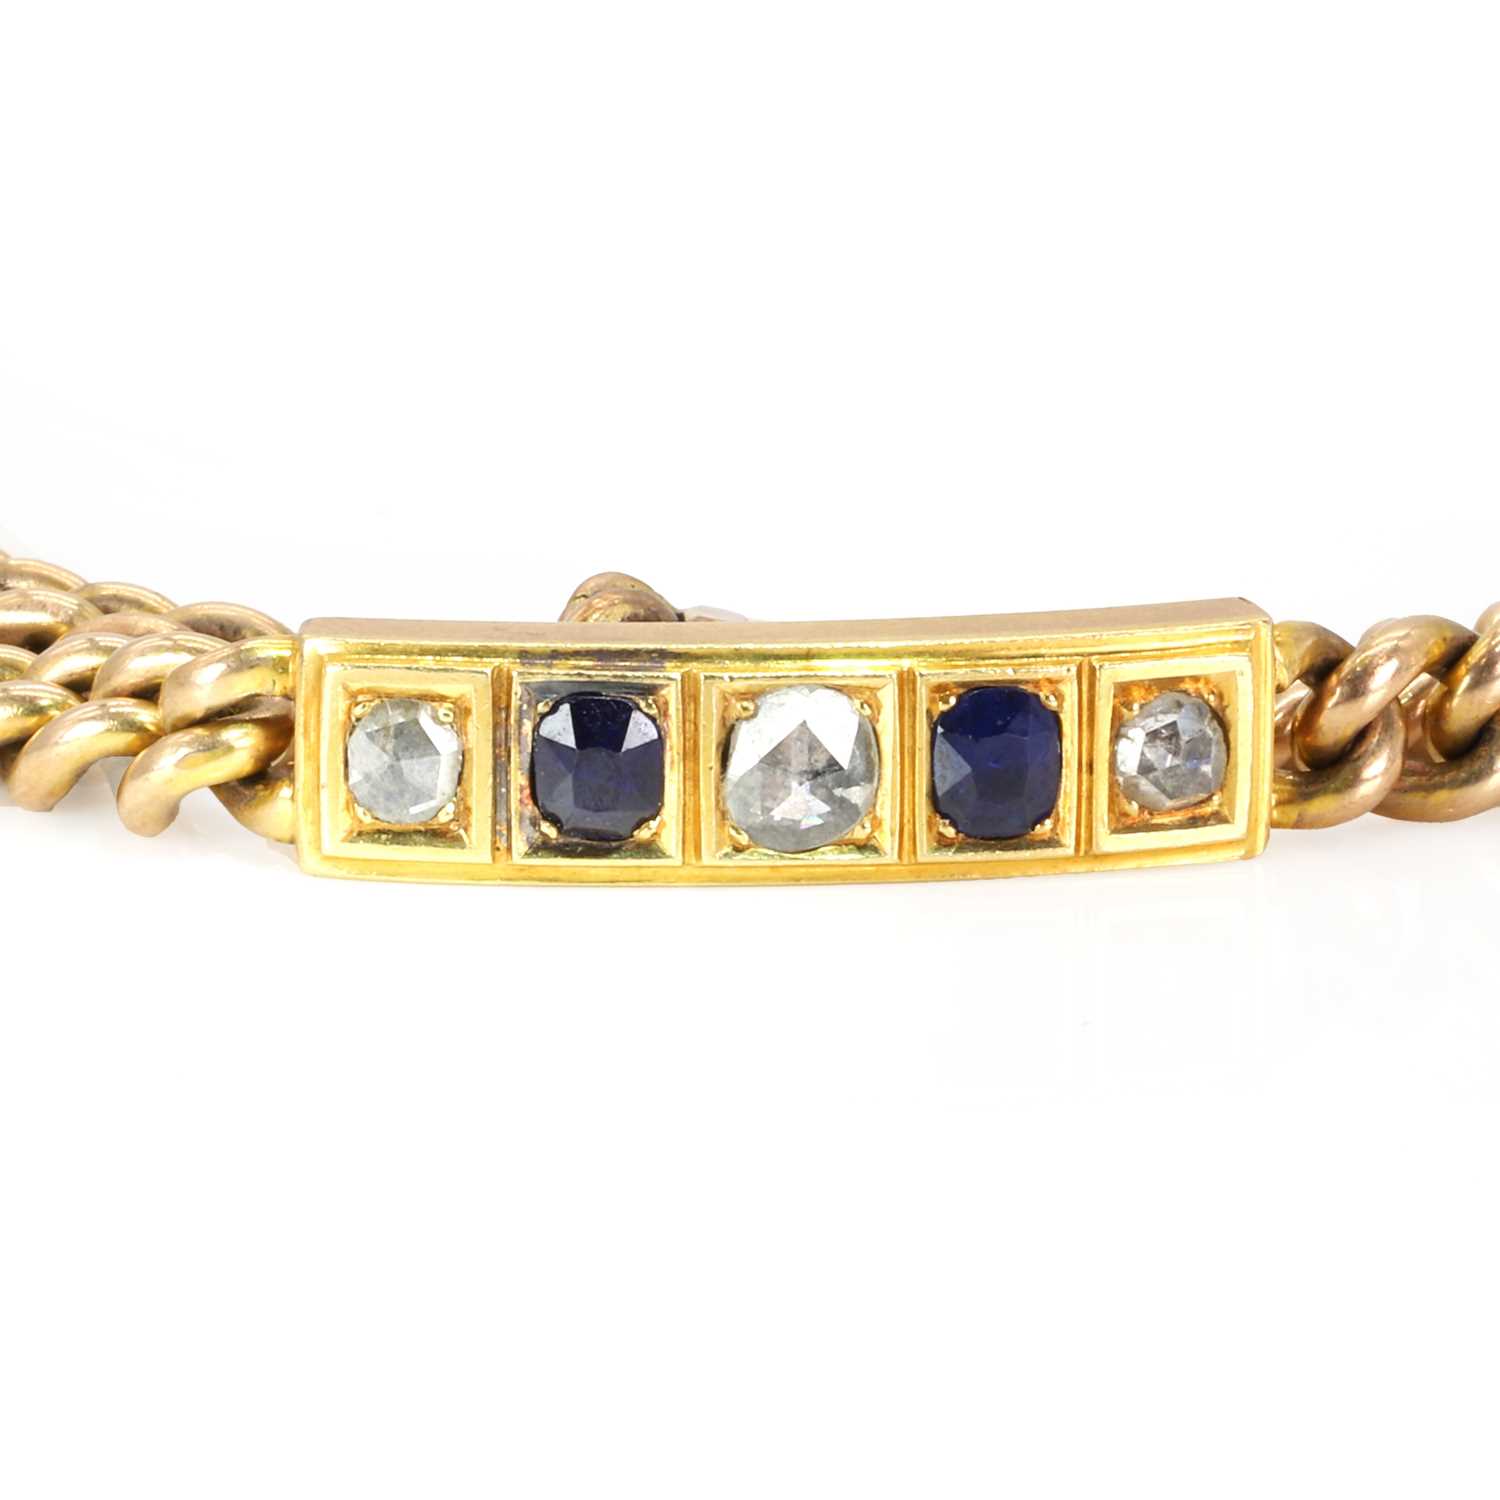 A curb link bracelet with a diamond and sapphire panel, c.1880, - Image 2 of 3